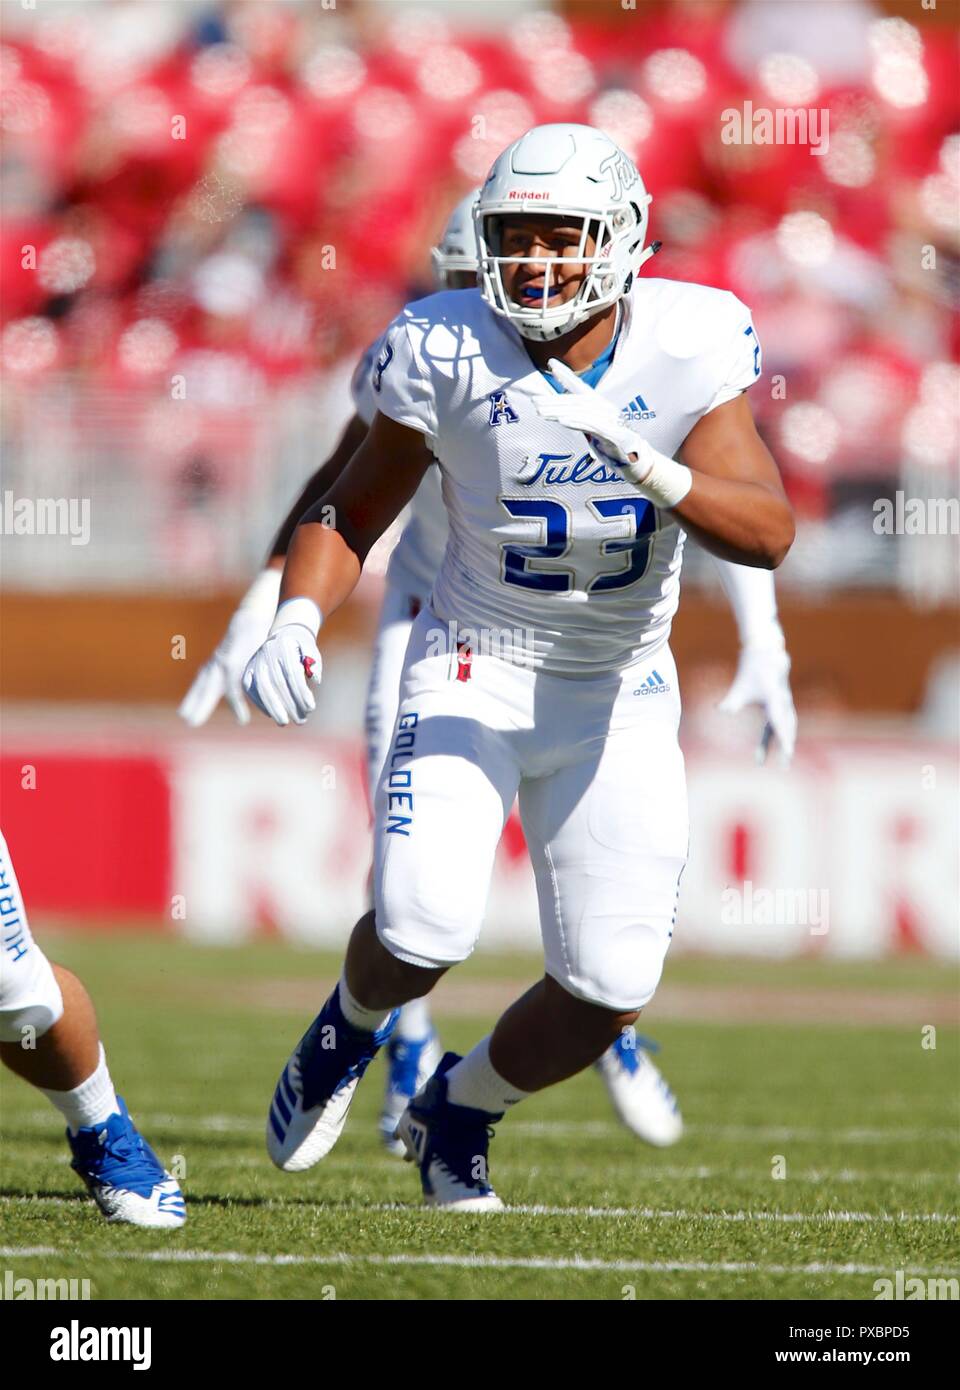 Oct 20, 2018: Zaven Collins #23 Tulsa linebacker comes up the field off the edge. Arkansas defeated Tulsa 23-0 at Donald W. Reynolds Stadium in Fayetteville, AR, Richey Miller/CSM Stock Photo